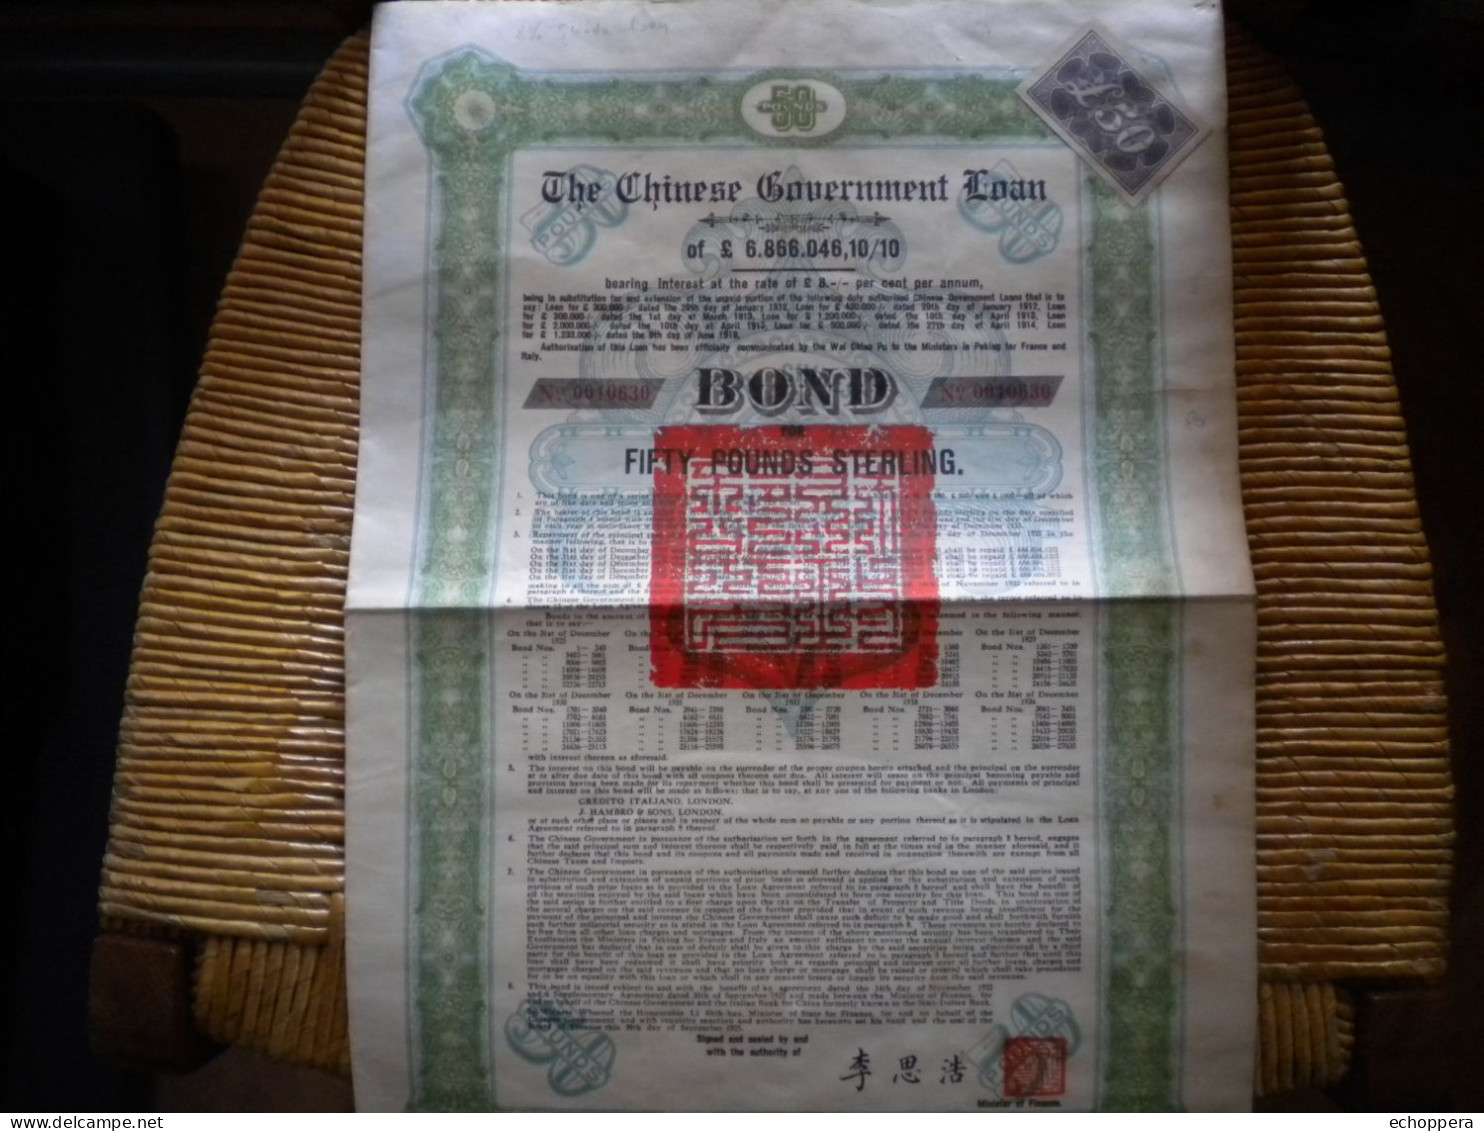 THE CHINESE GOVERNMENT LOAN - 50 £ Sterling  8%  CANTON KOWLOON RAILWAYS - 1925 - Asia